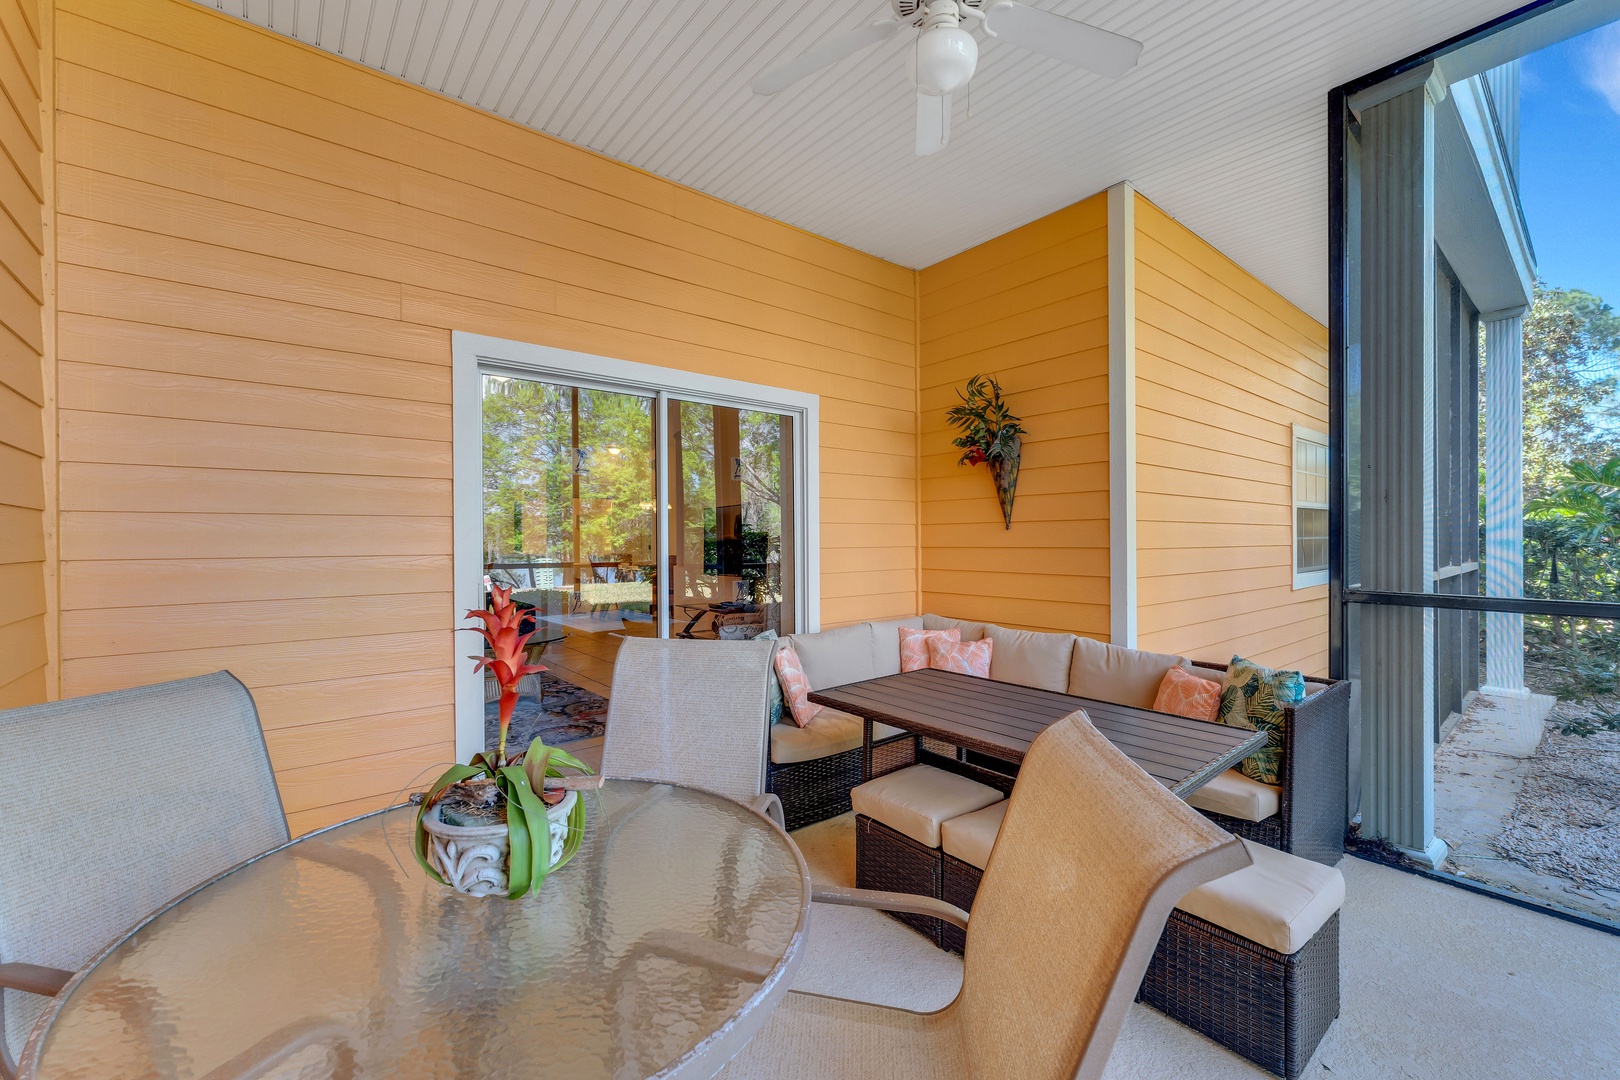 Lounge the day away or dine in the fresh air on the screened patio